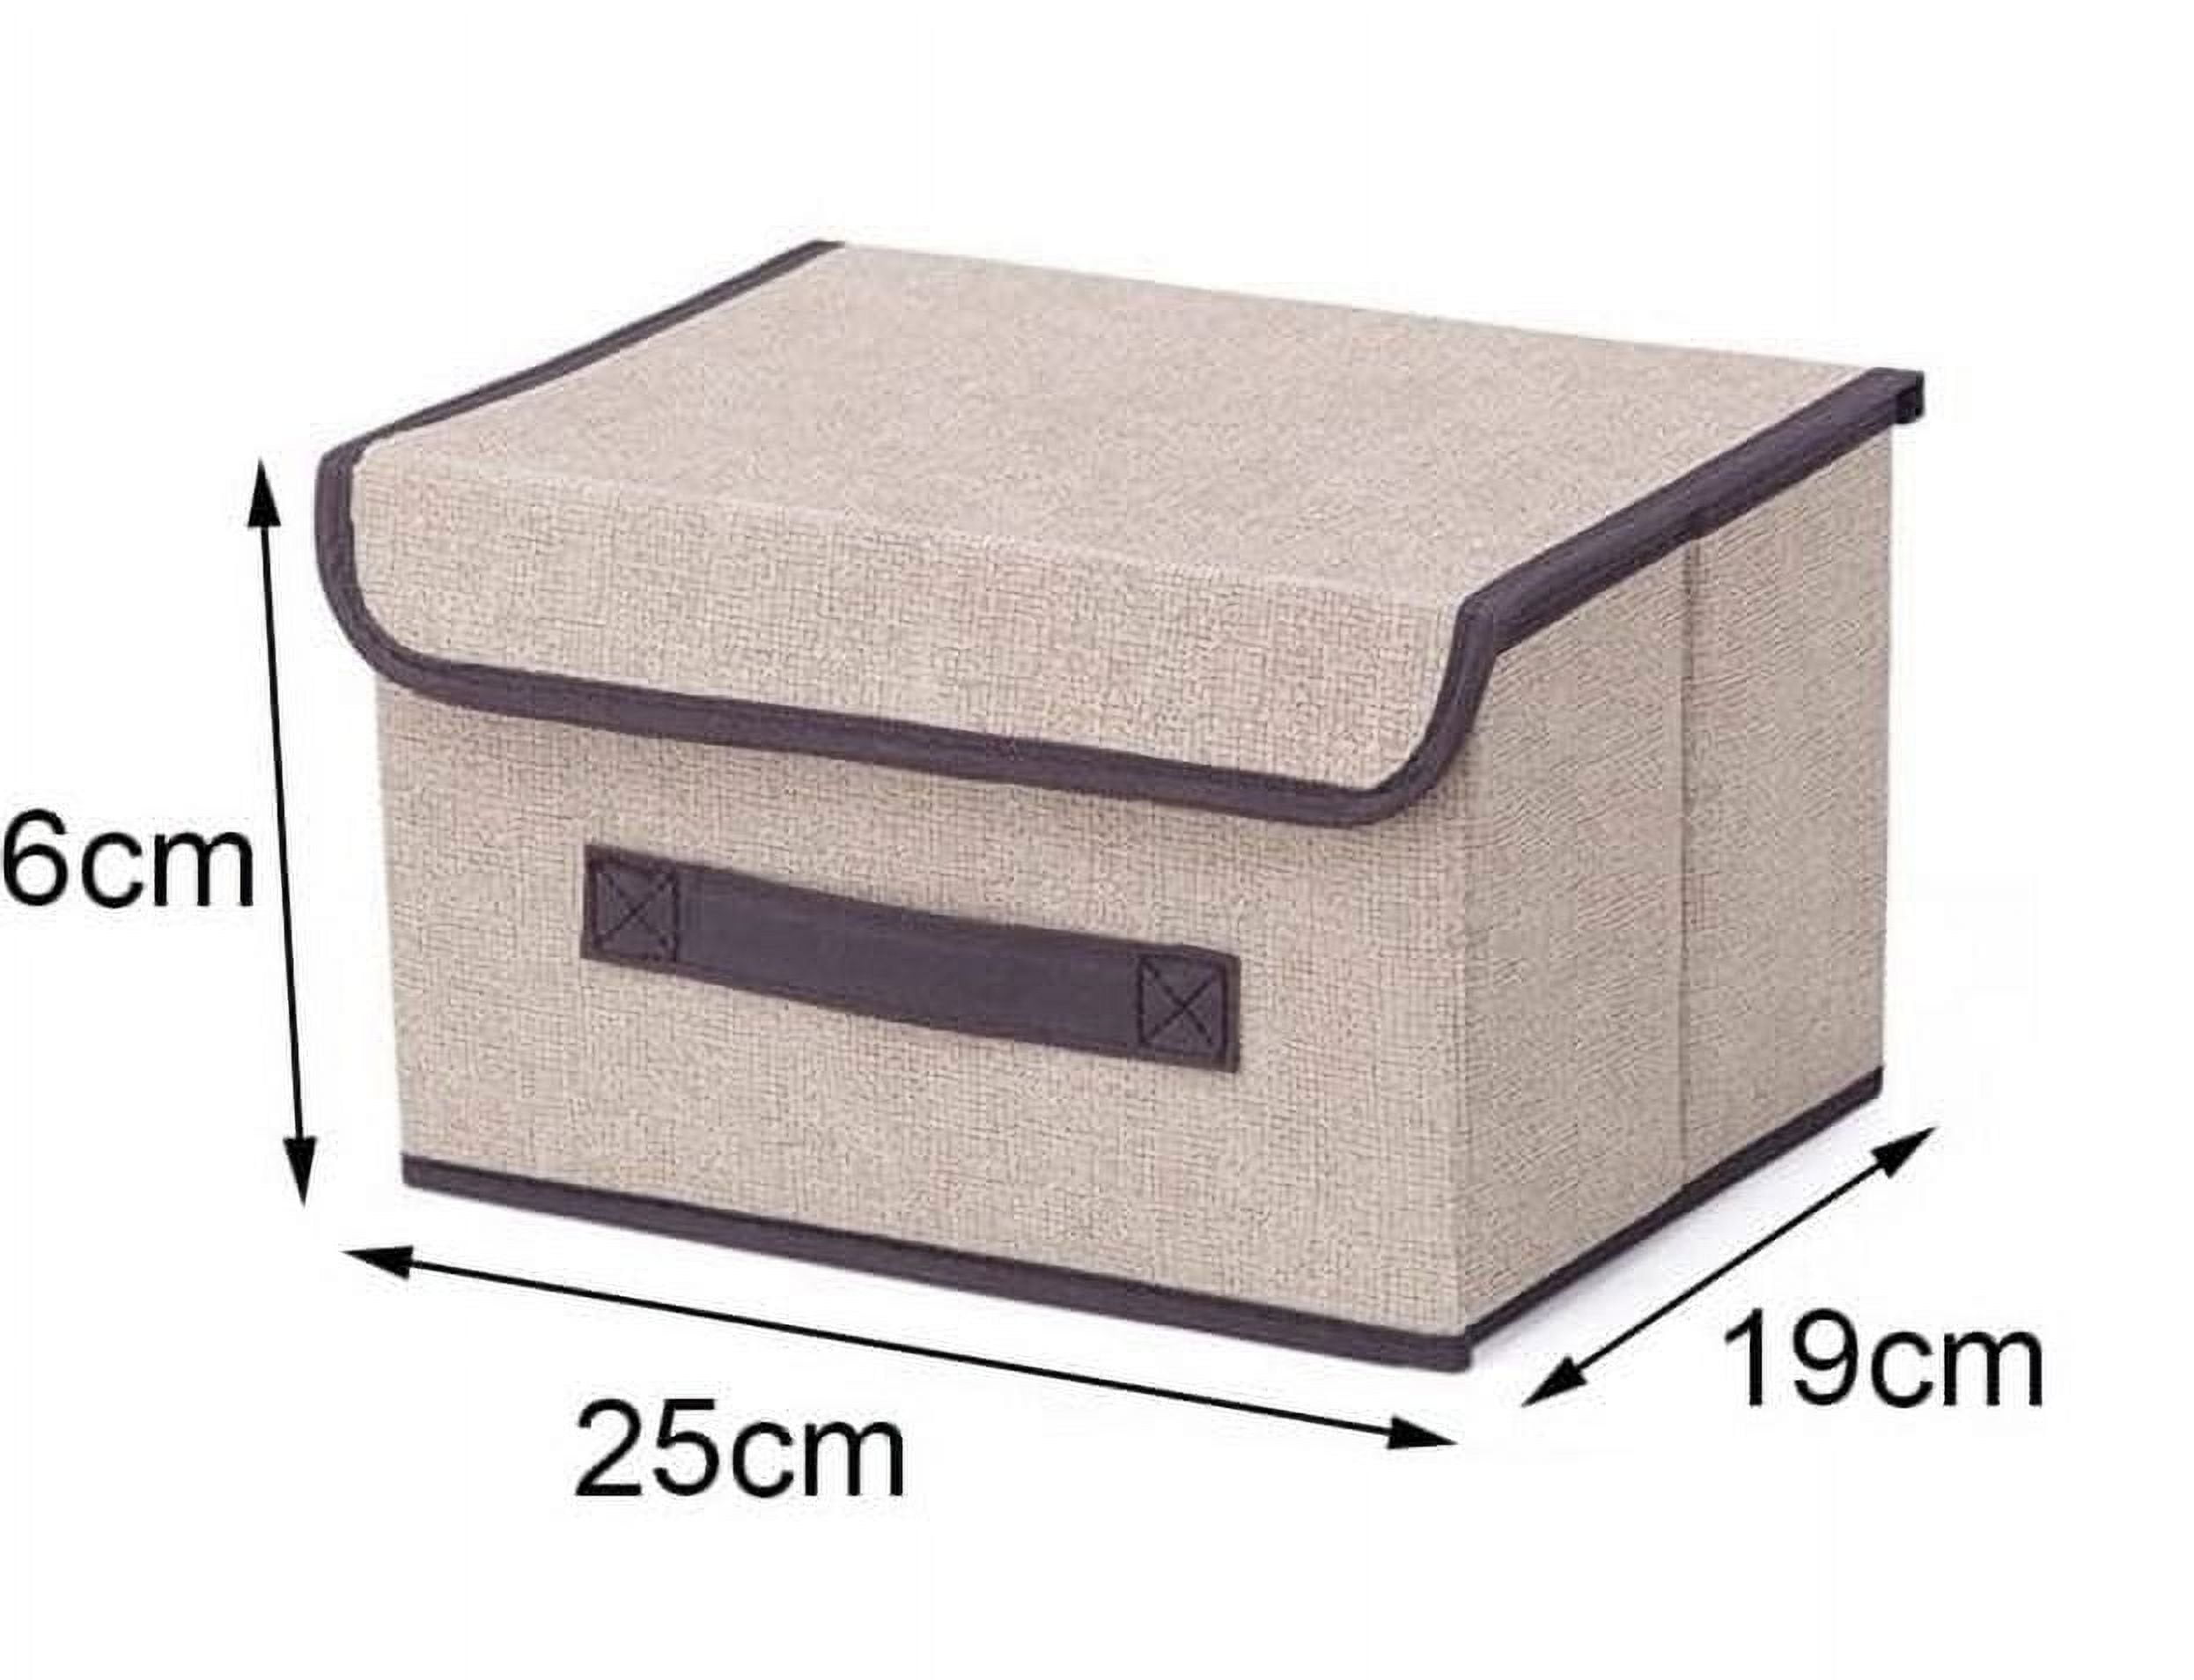 Lwithszg Foldable Storage Boxes with Lids Fabric Storage Bins with Lids, Small Closet Organizers for Clothes Storage, Room Organization, Office